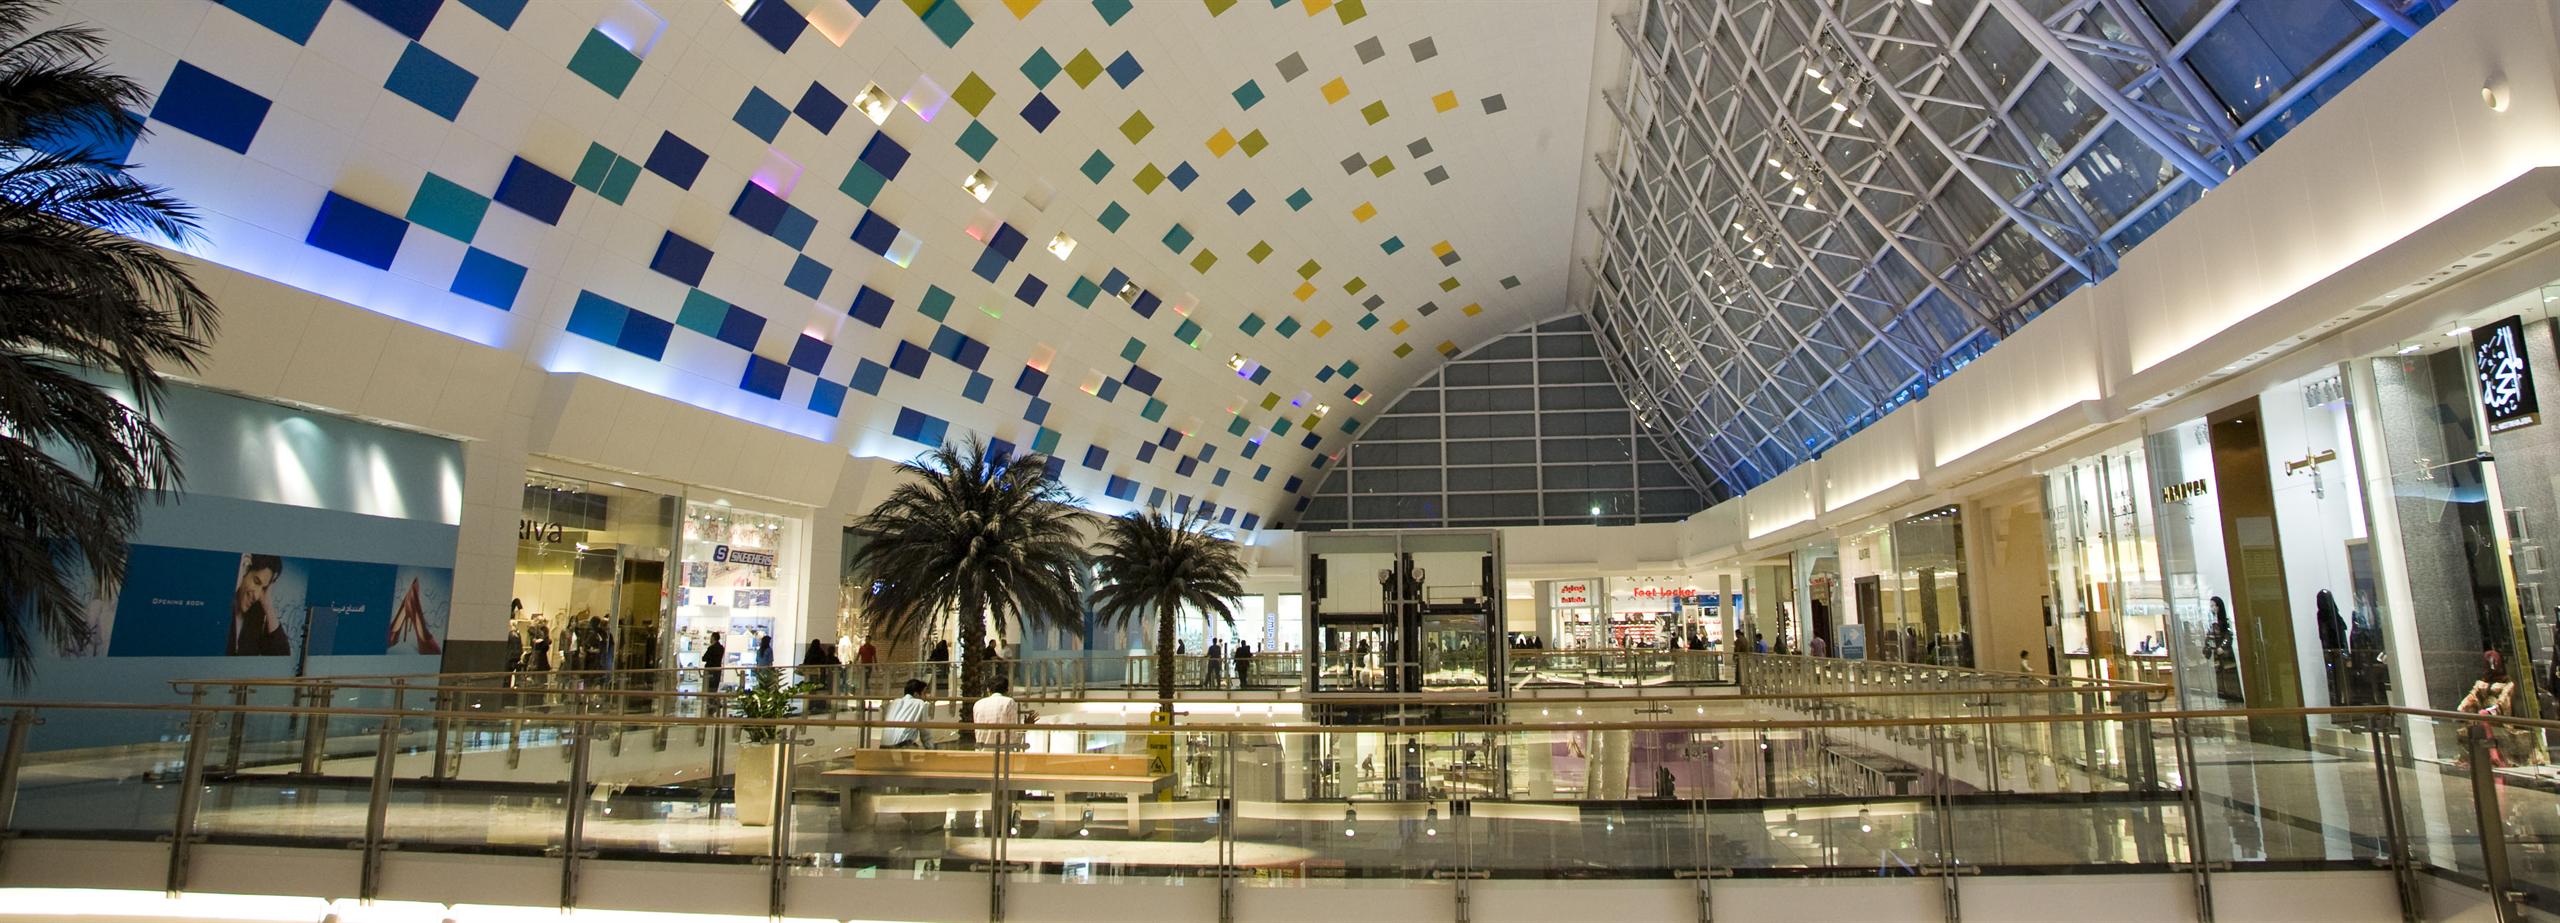 View of the ceiling Inside the mall